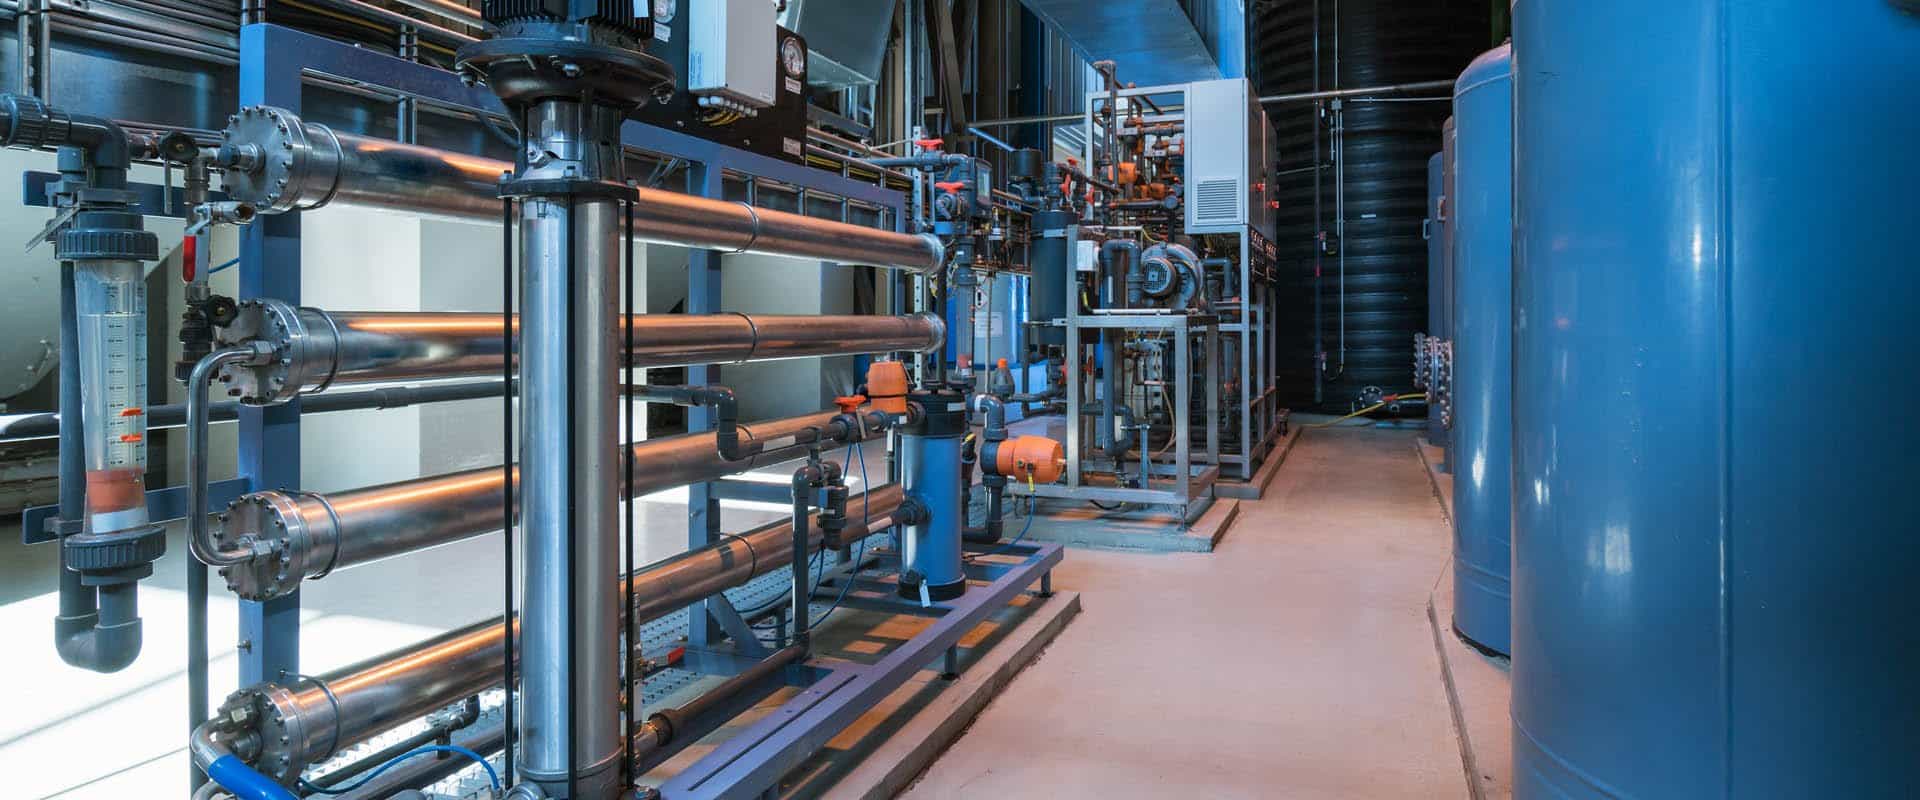 RO Plant | Reverse Osmosis system